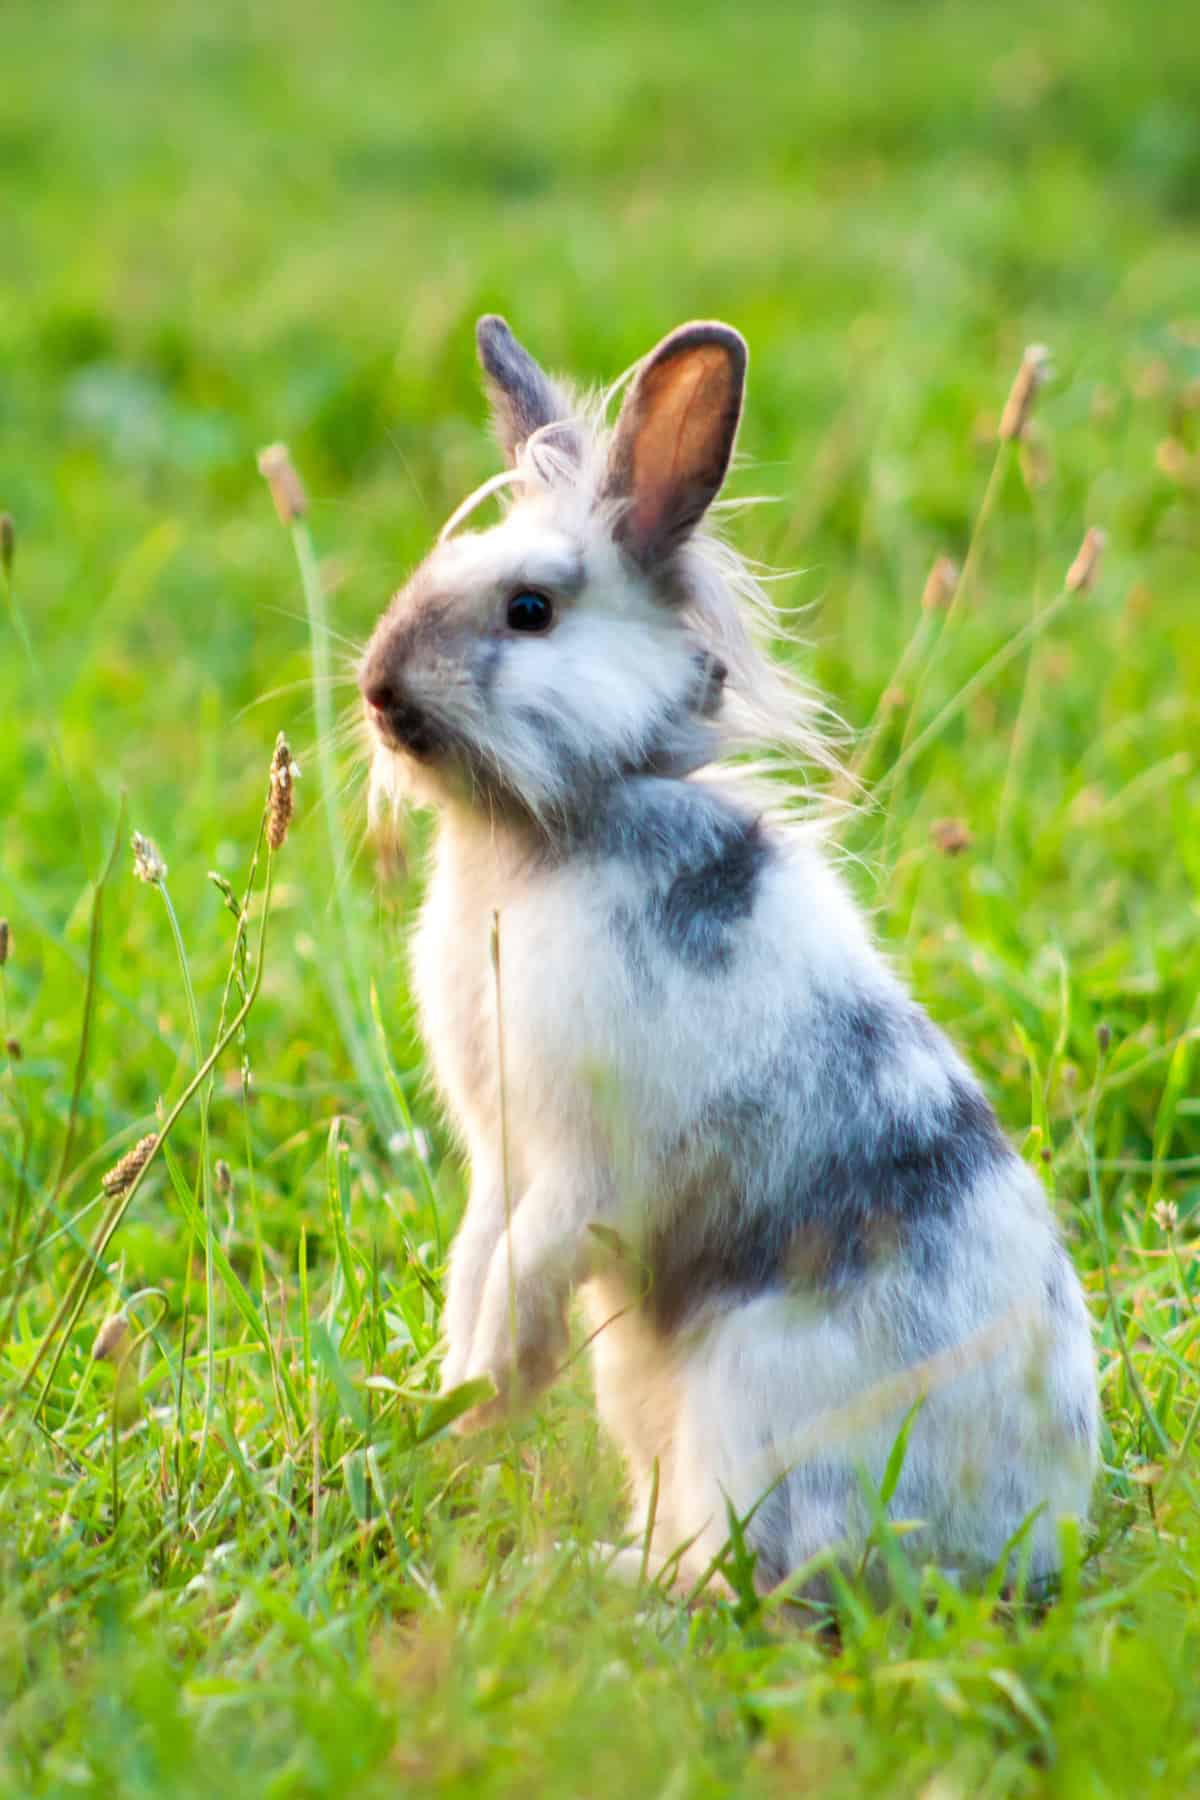 white and brown rabbit standing on hind legs.